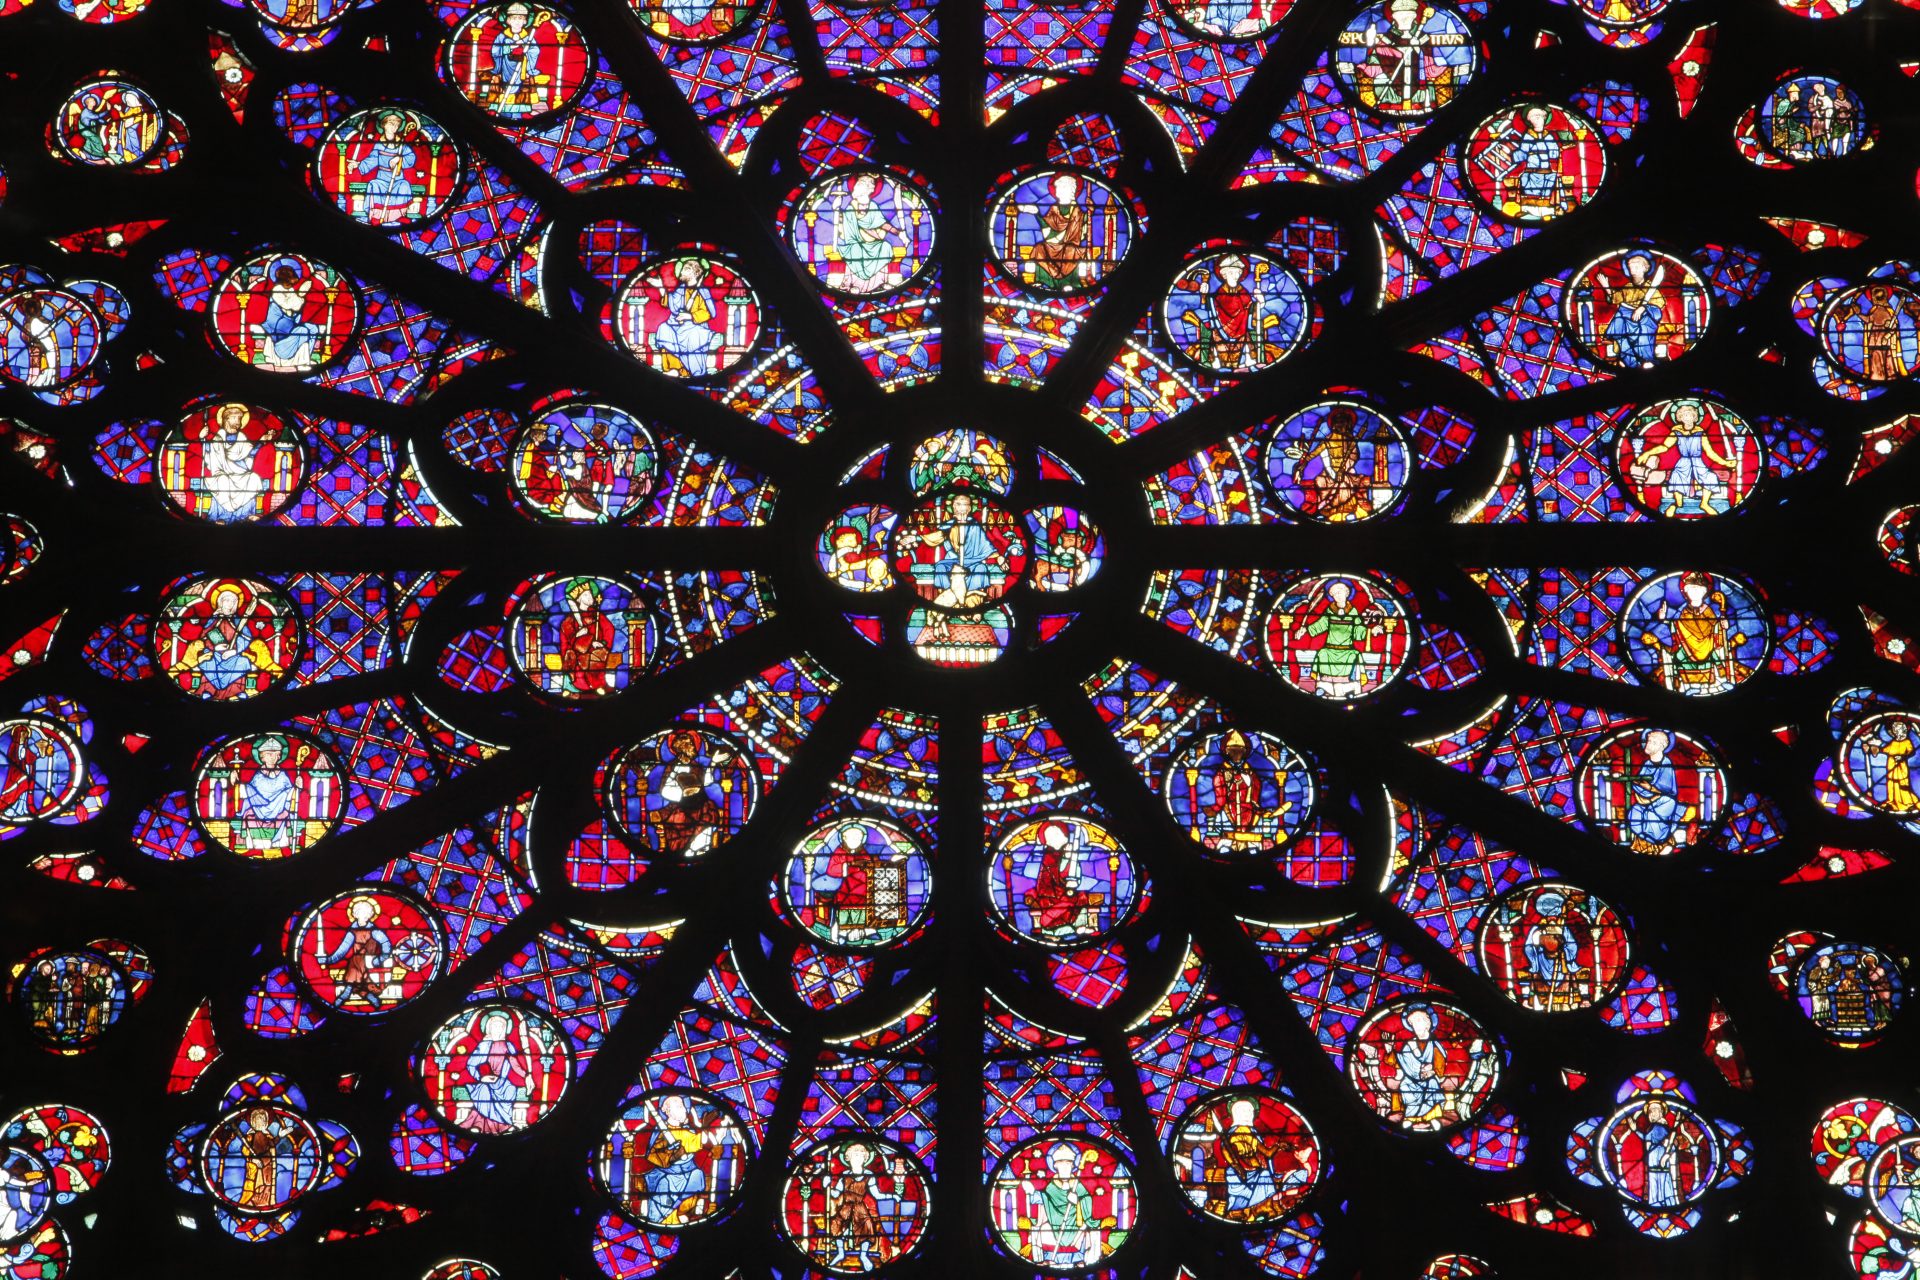 The stained-glass windows